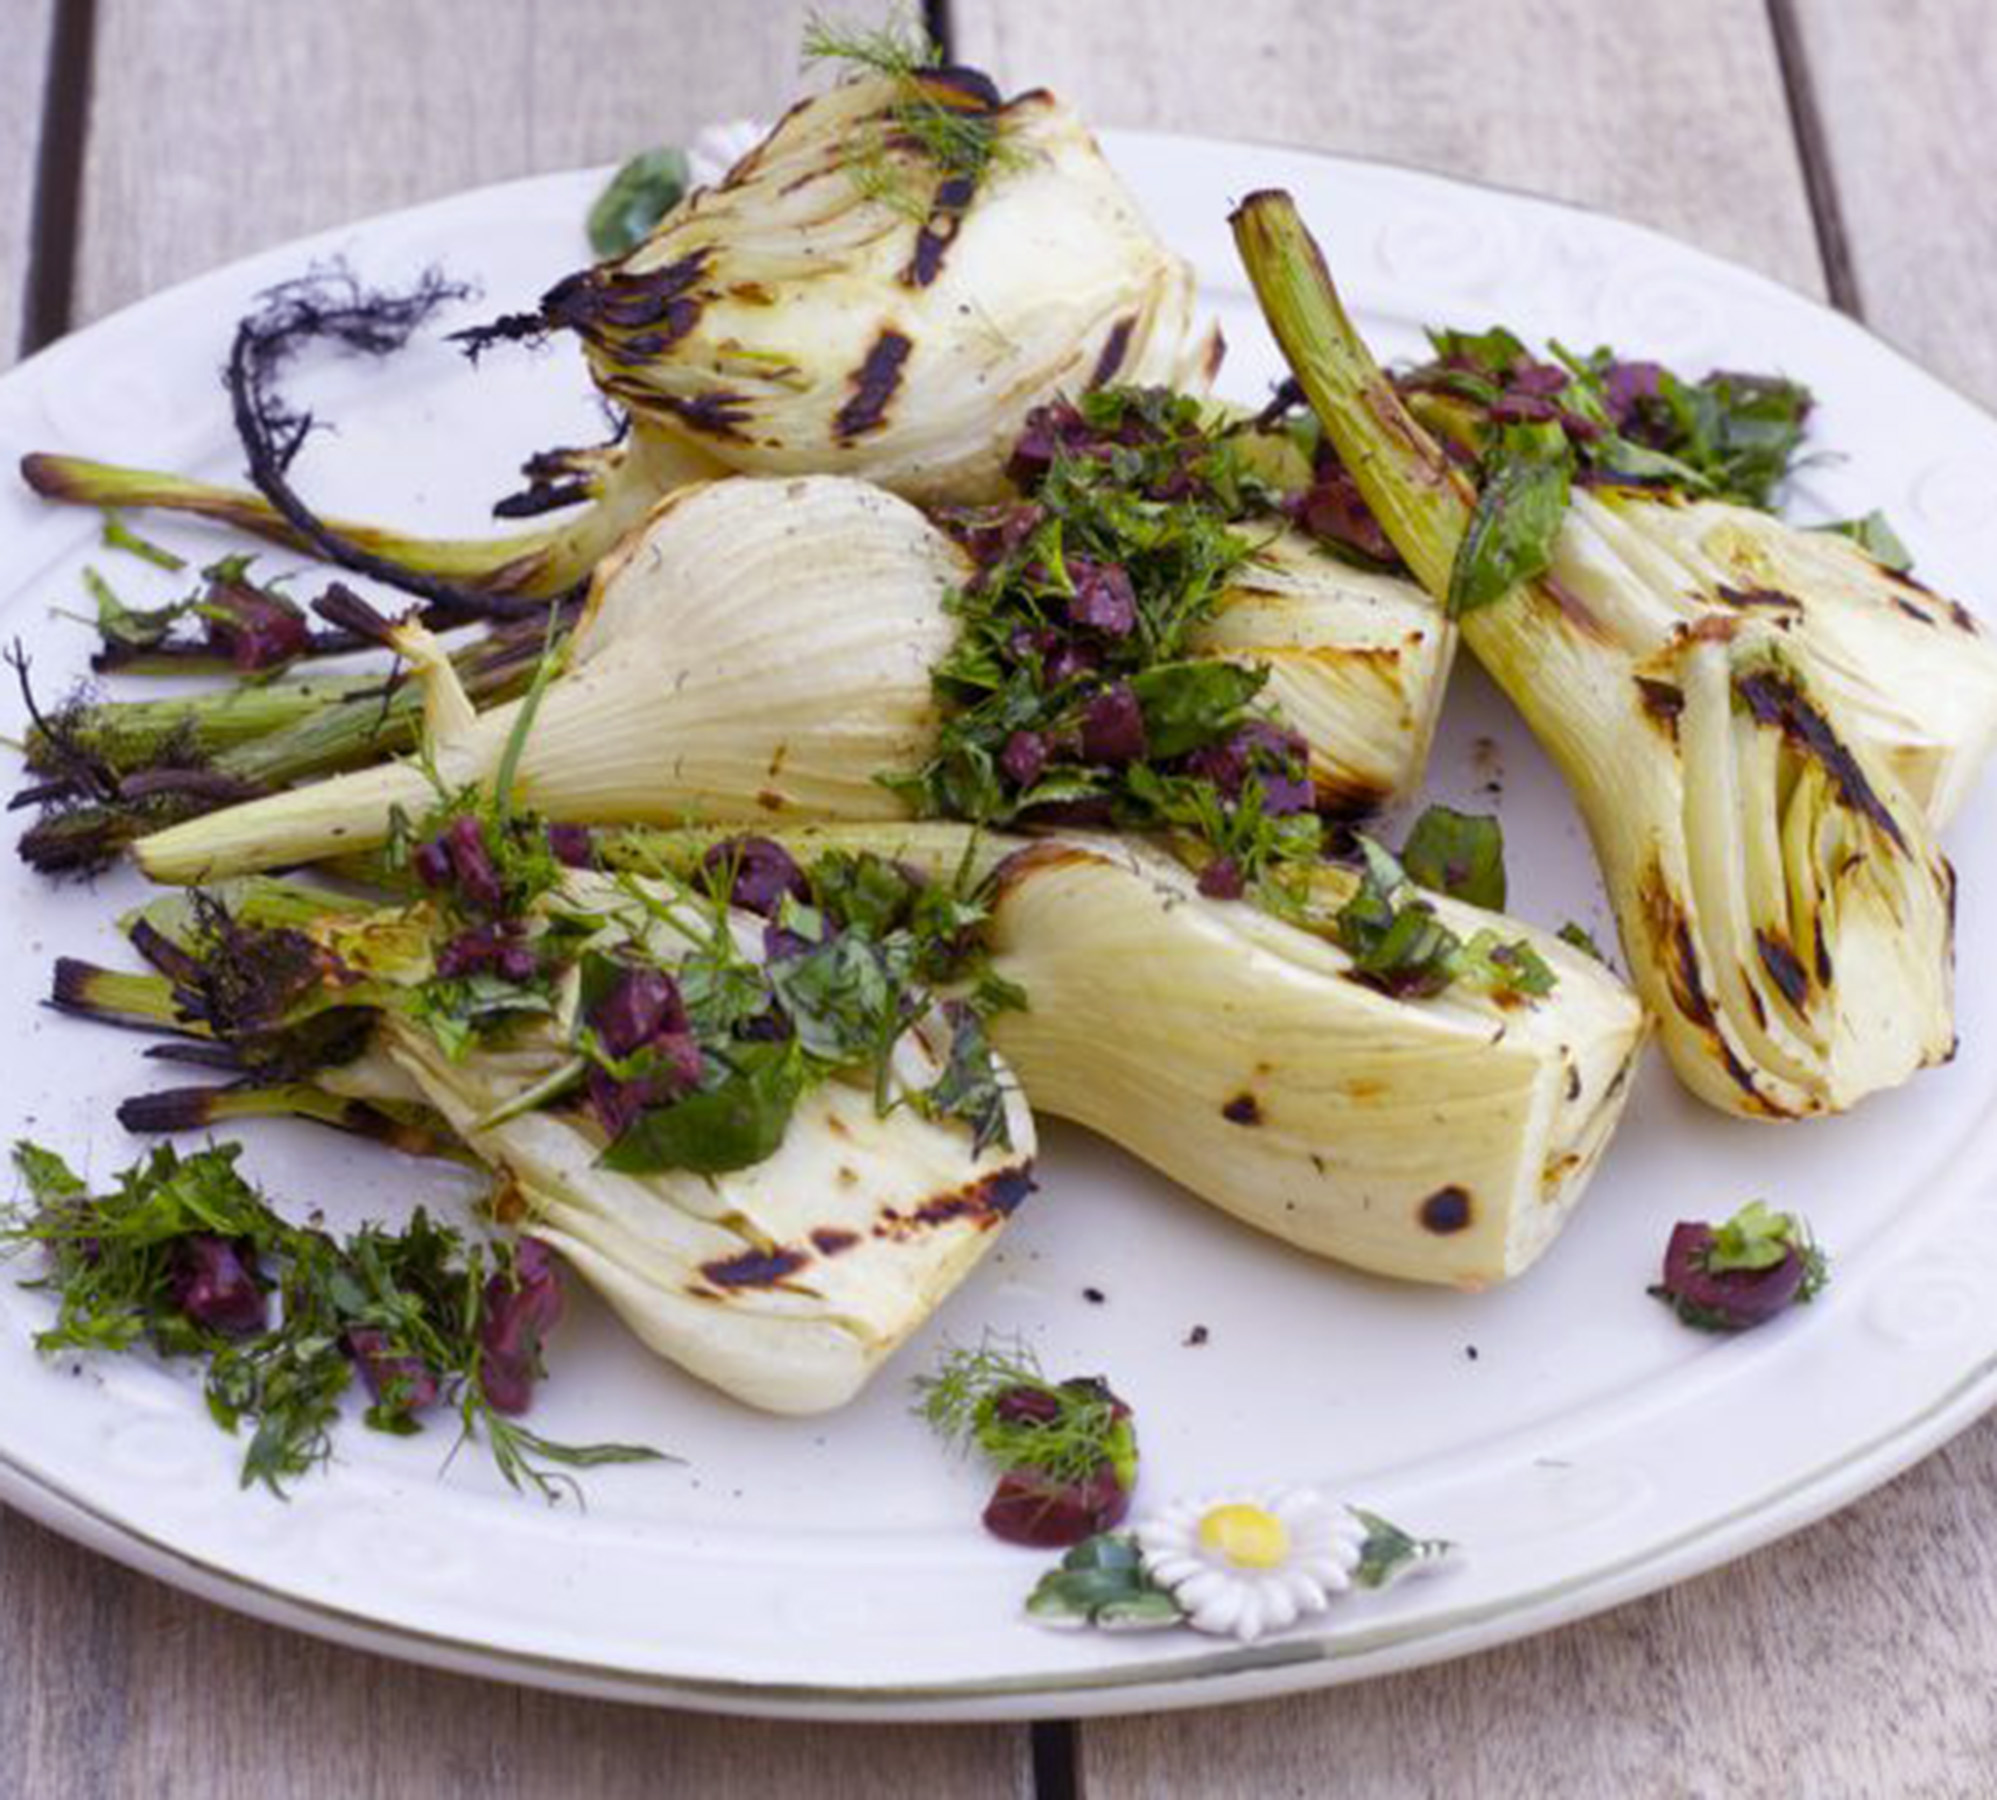 Grilled Fennel with Olives & Herbs